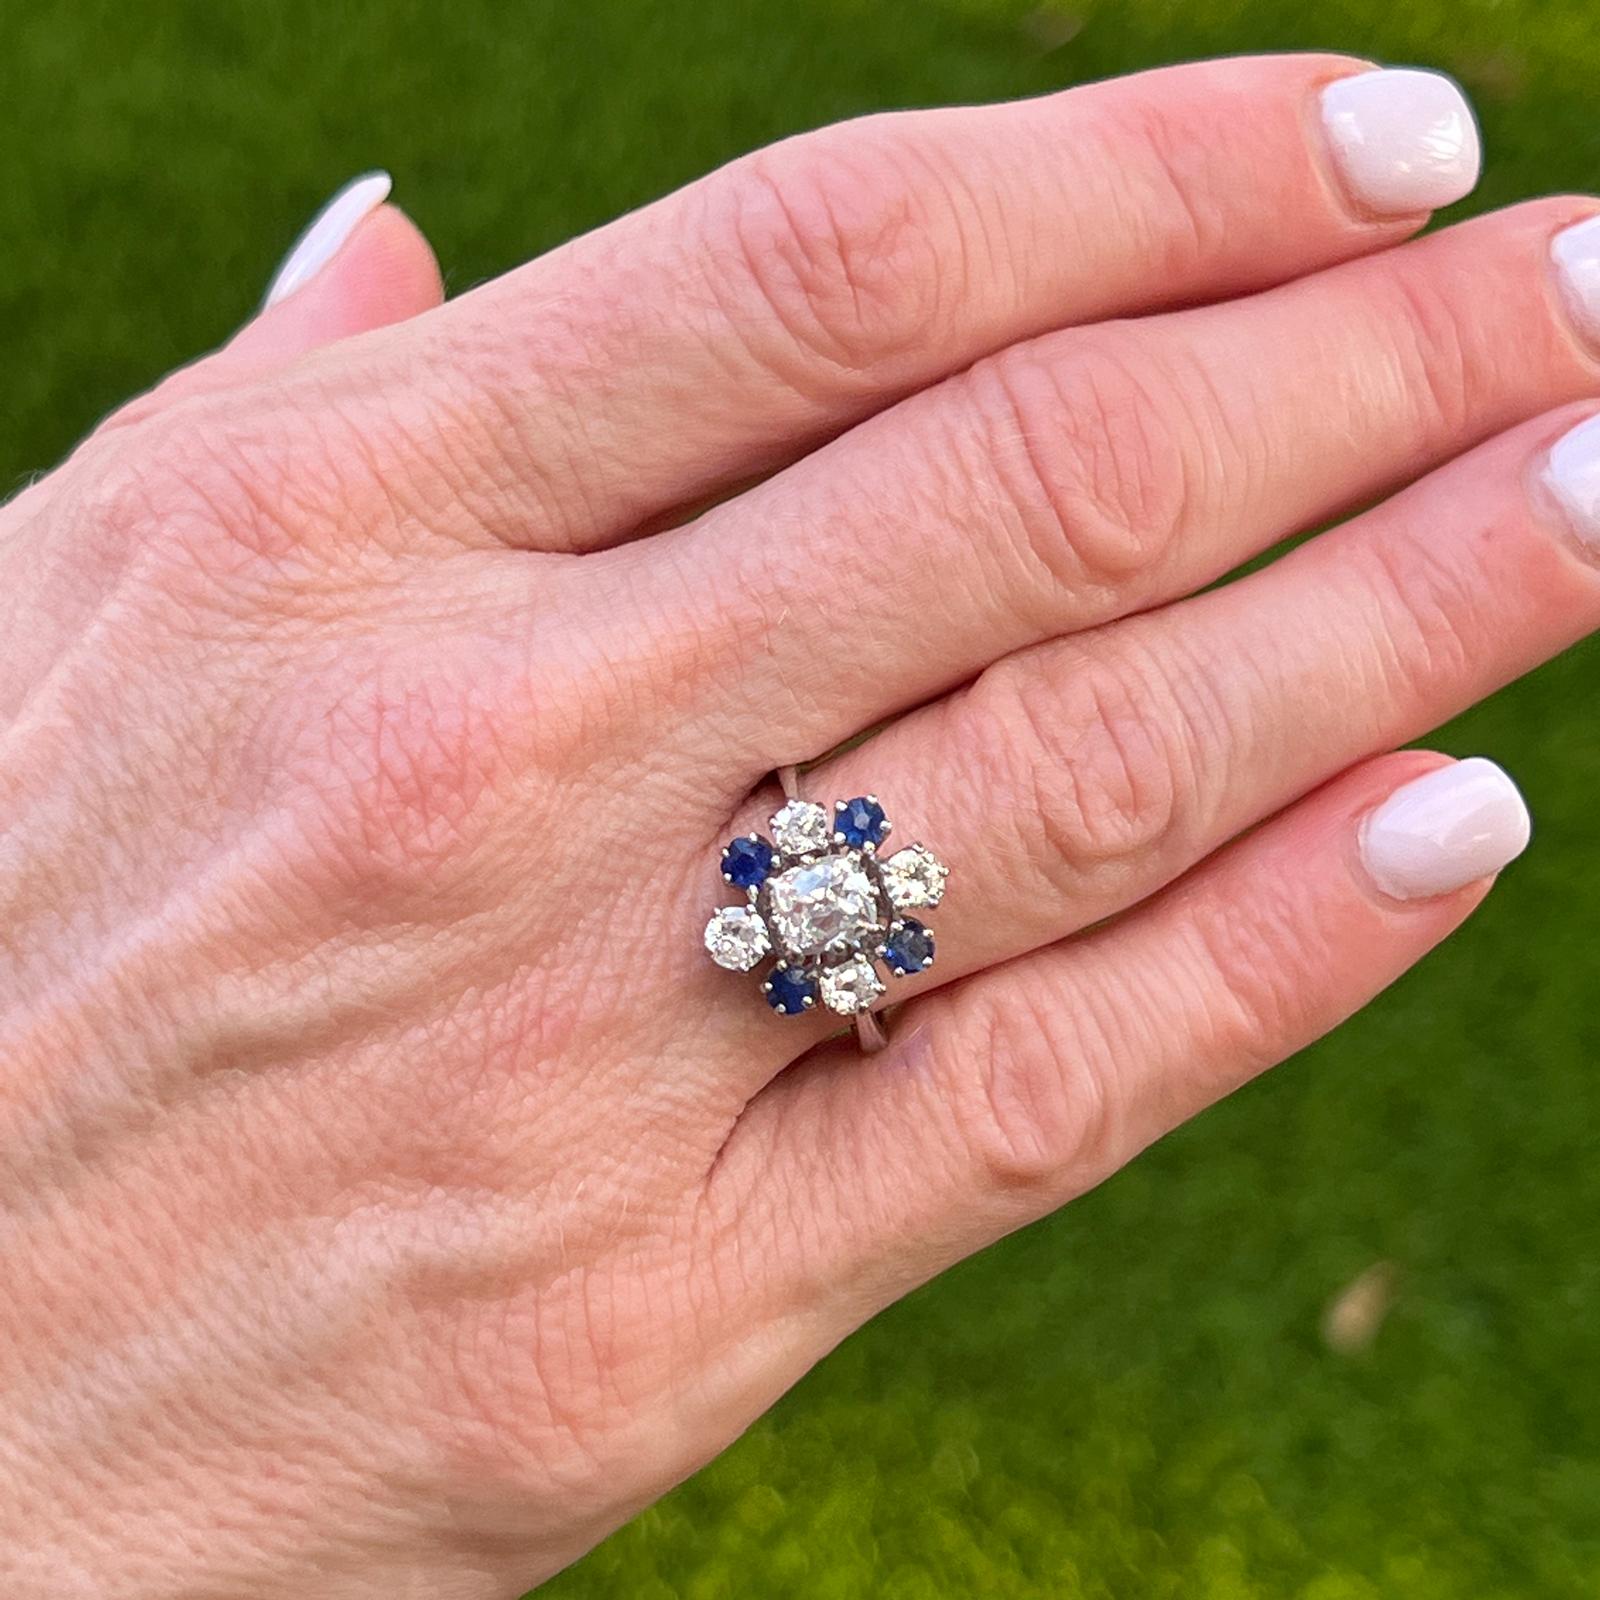 Beautiful diamond and sapphire ring circa early 1900's. The ring features an Old Mine Cut center diamond weighing 1.02 carats (exact weight). Another 4 Old Mine Cut diamonds weigh approximately .60 CTW. The 4 natural blue sapphires weigh